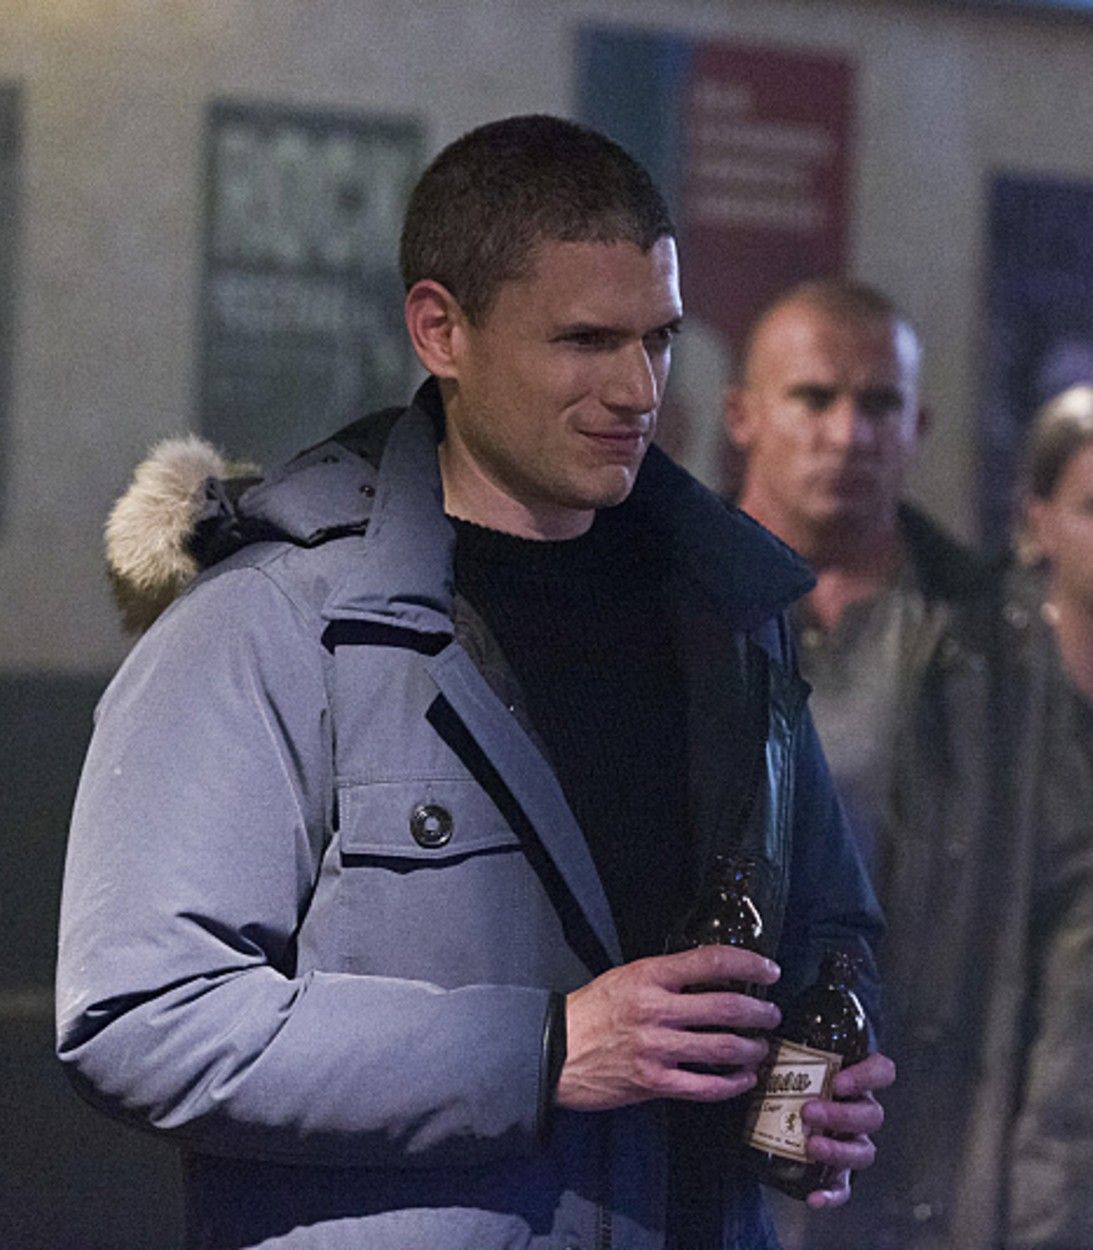 Captain Cold Legends of Tomorrow pic image vertical